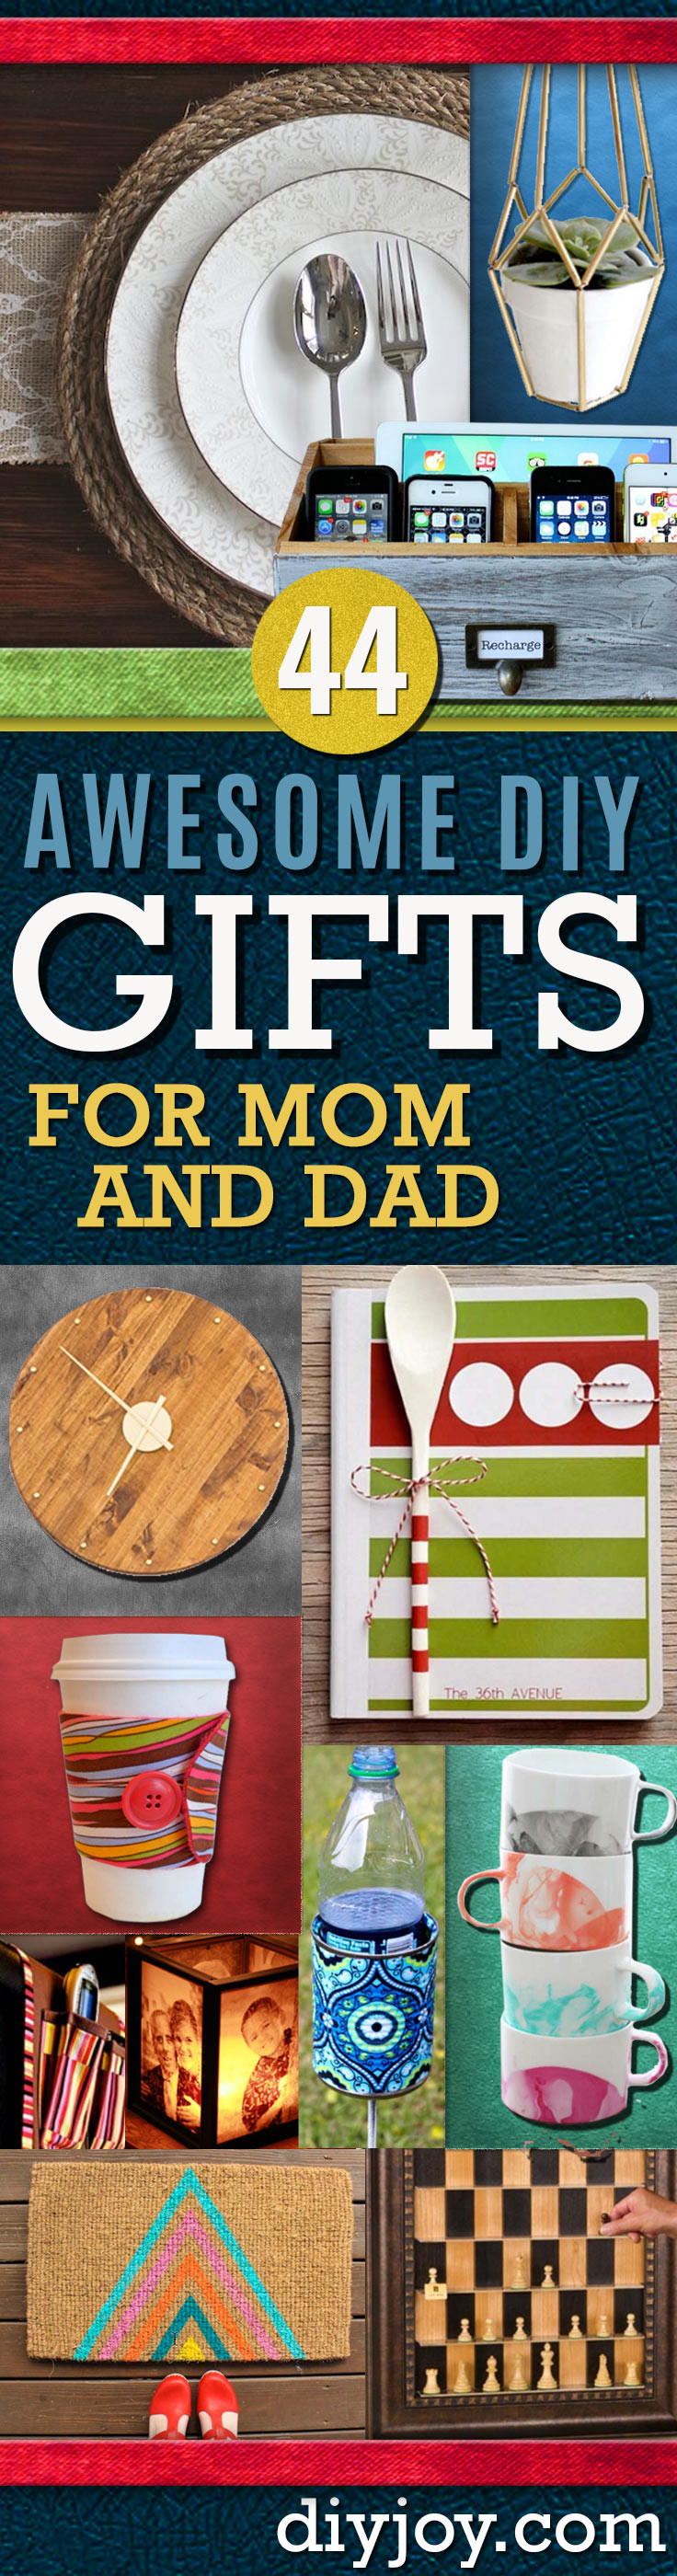 DIY Gifts For Dad Christmas
 Awesome DIY Gift Ideas Mom and Dad Will Love